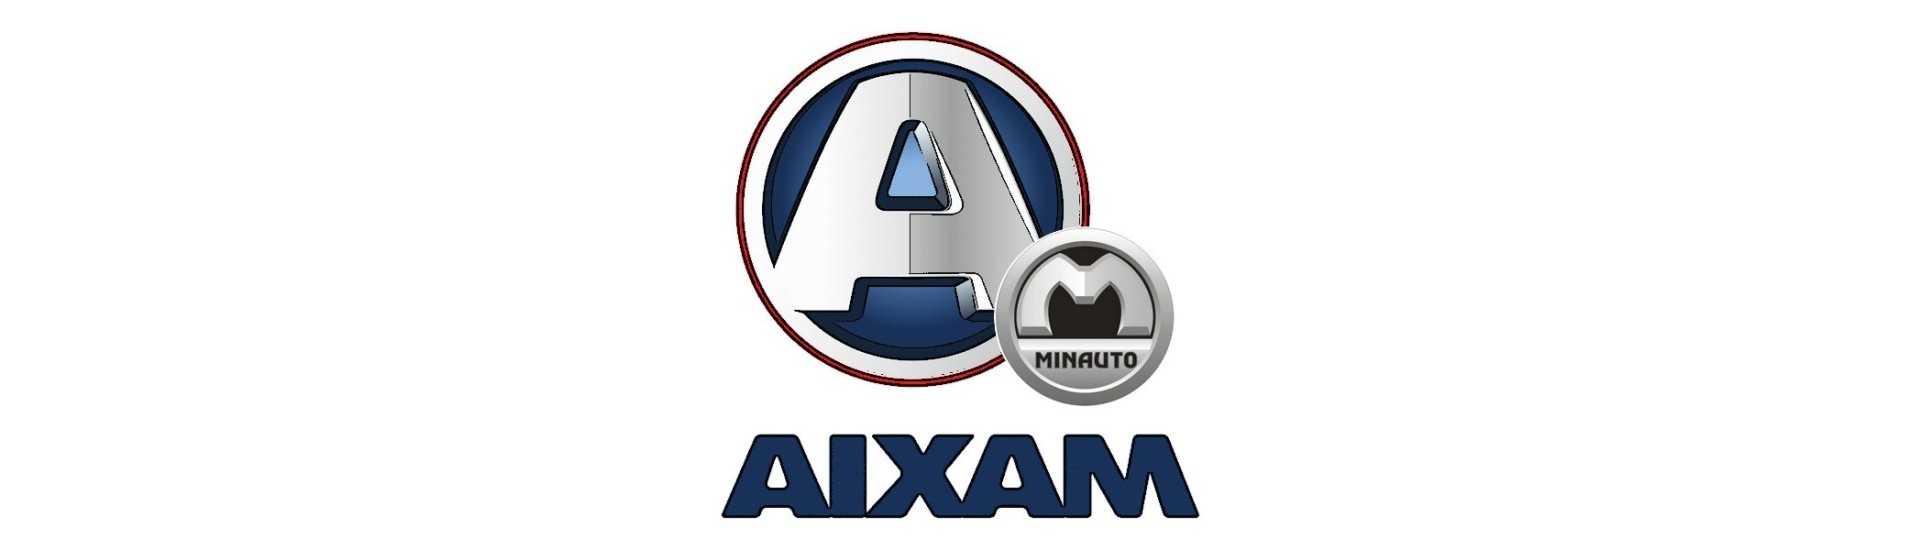 Dashboard at best price for car without a permit Aixam Minauto